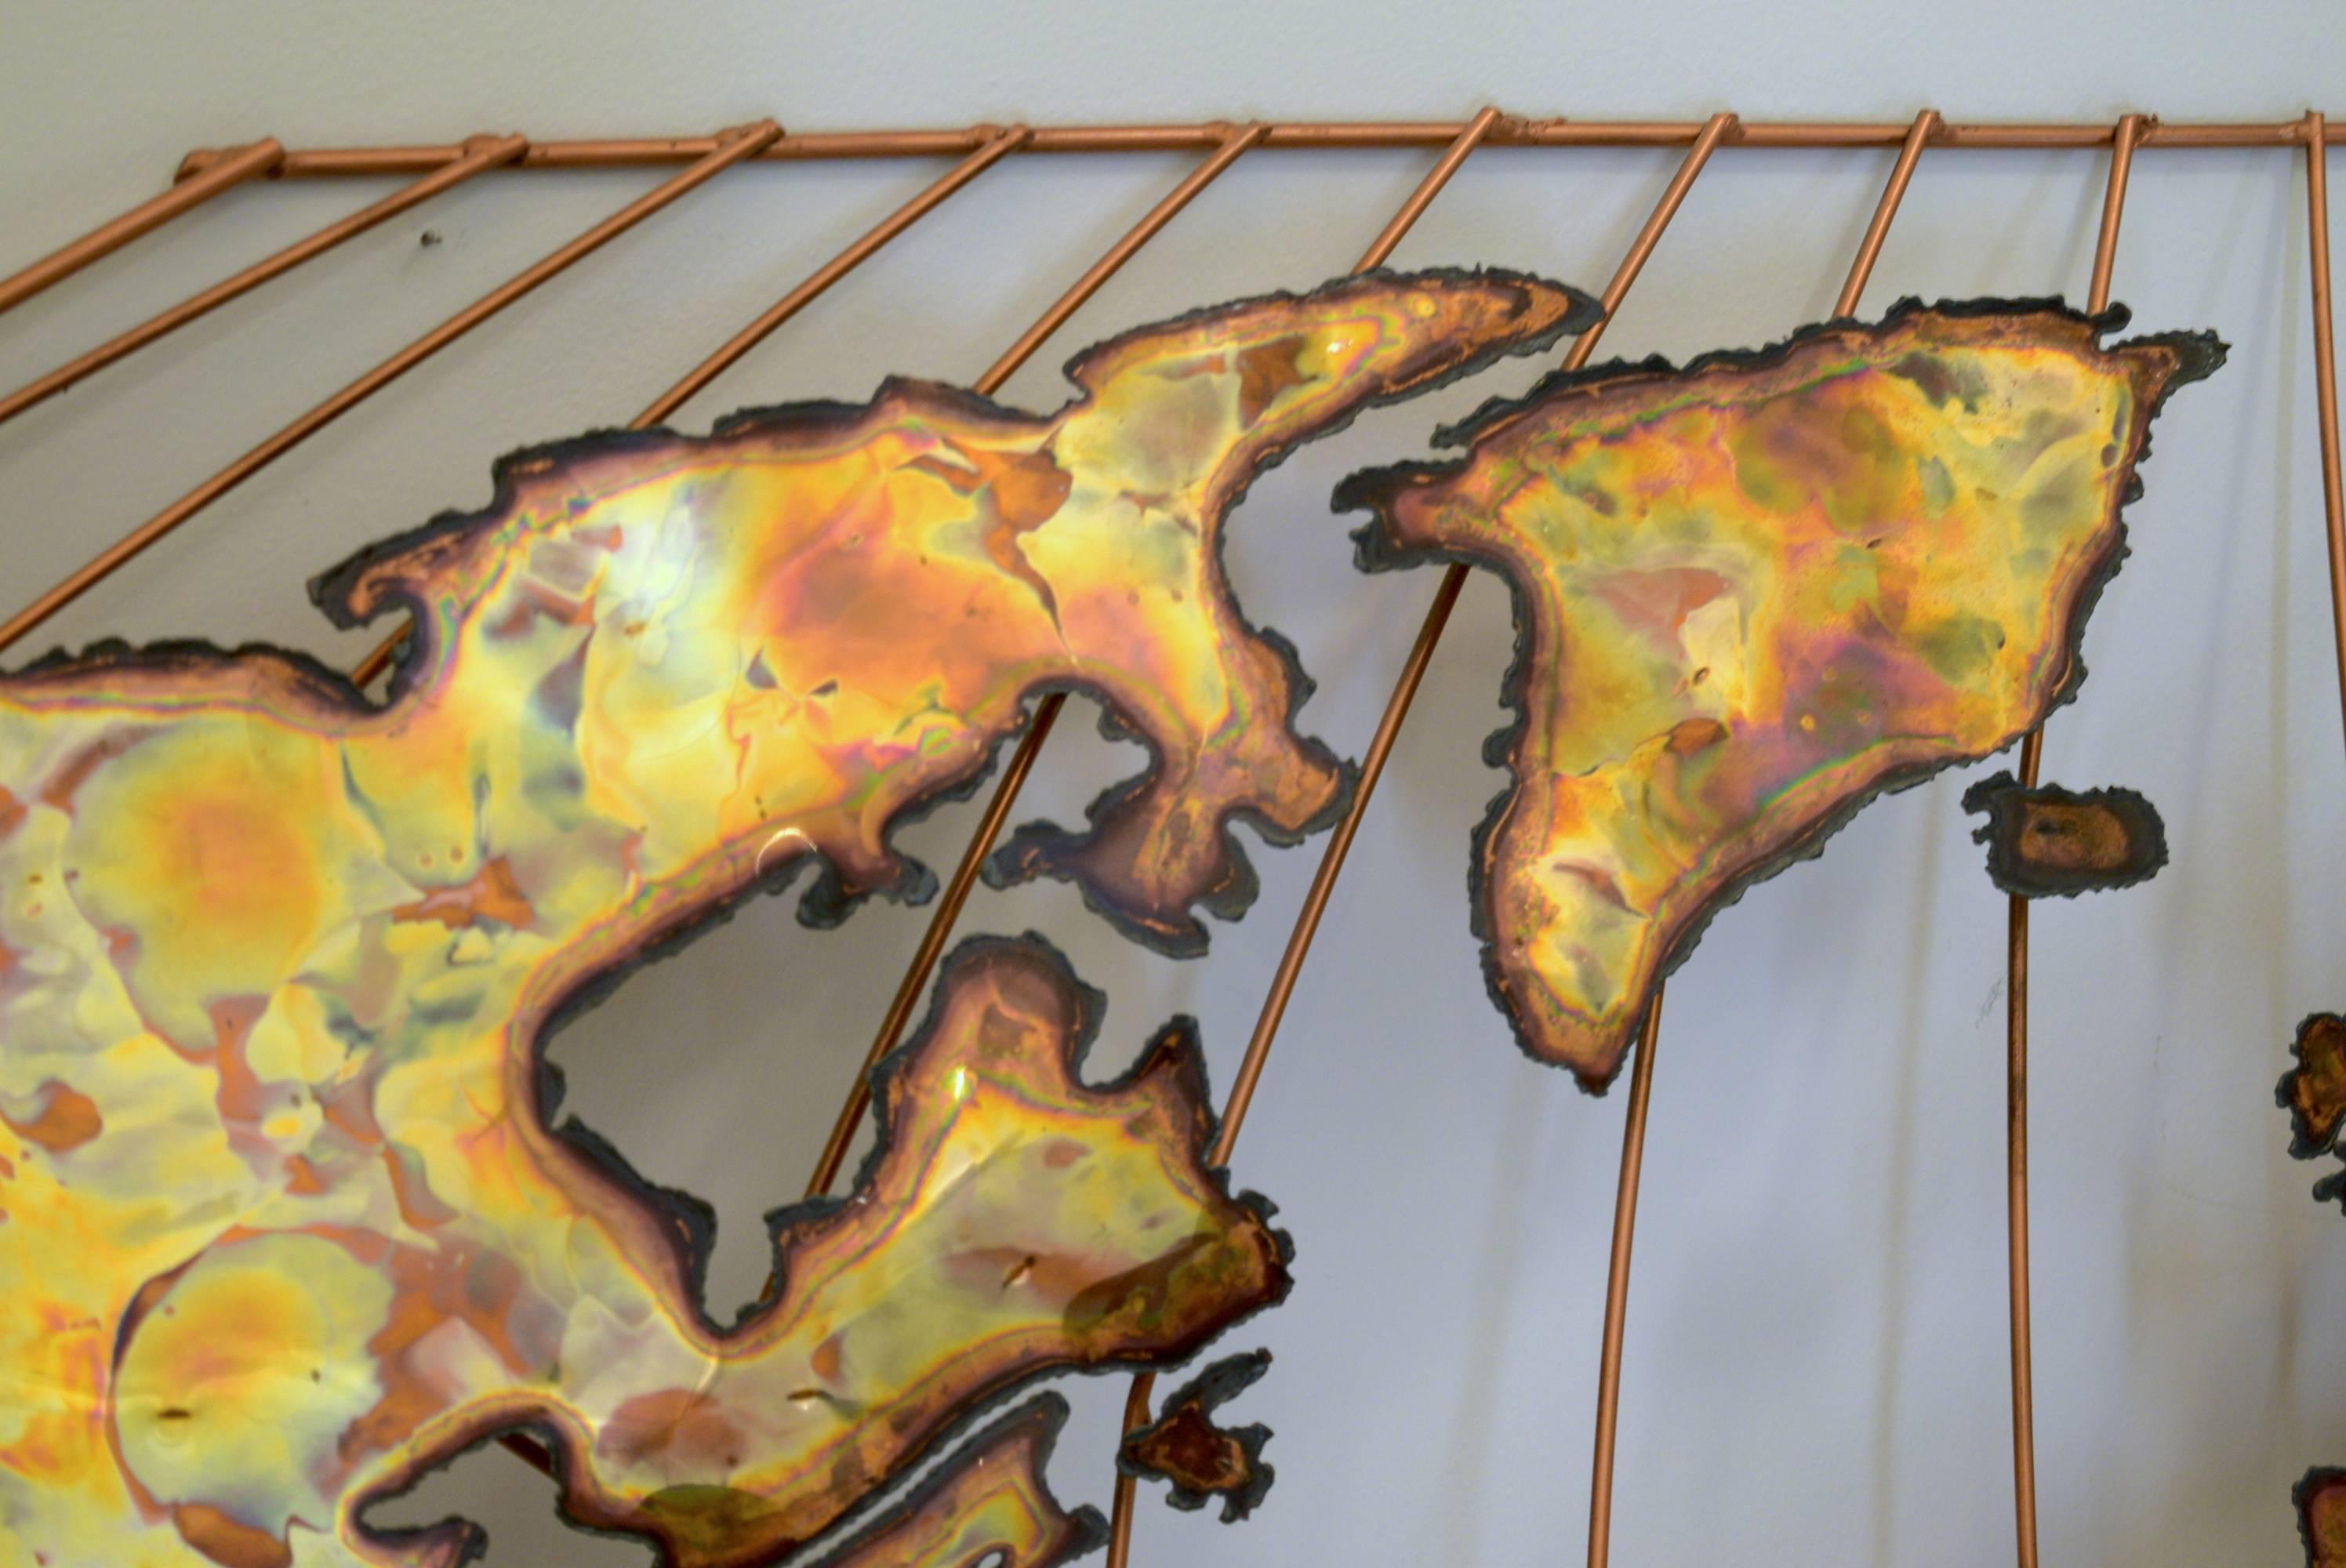 American Giant Map of the World in Burnished Copper, Metal and Steel